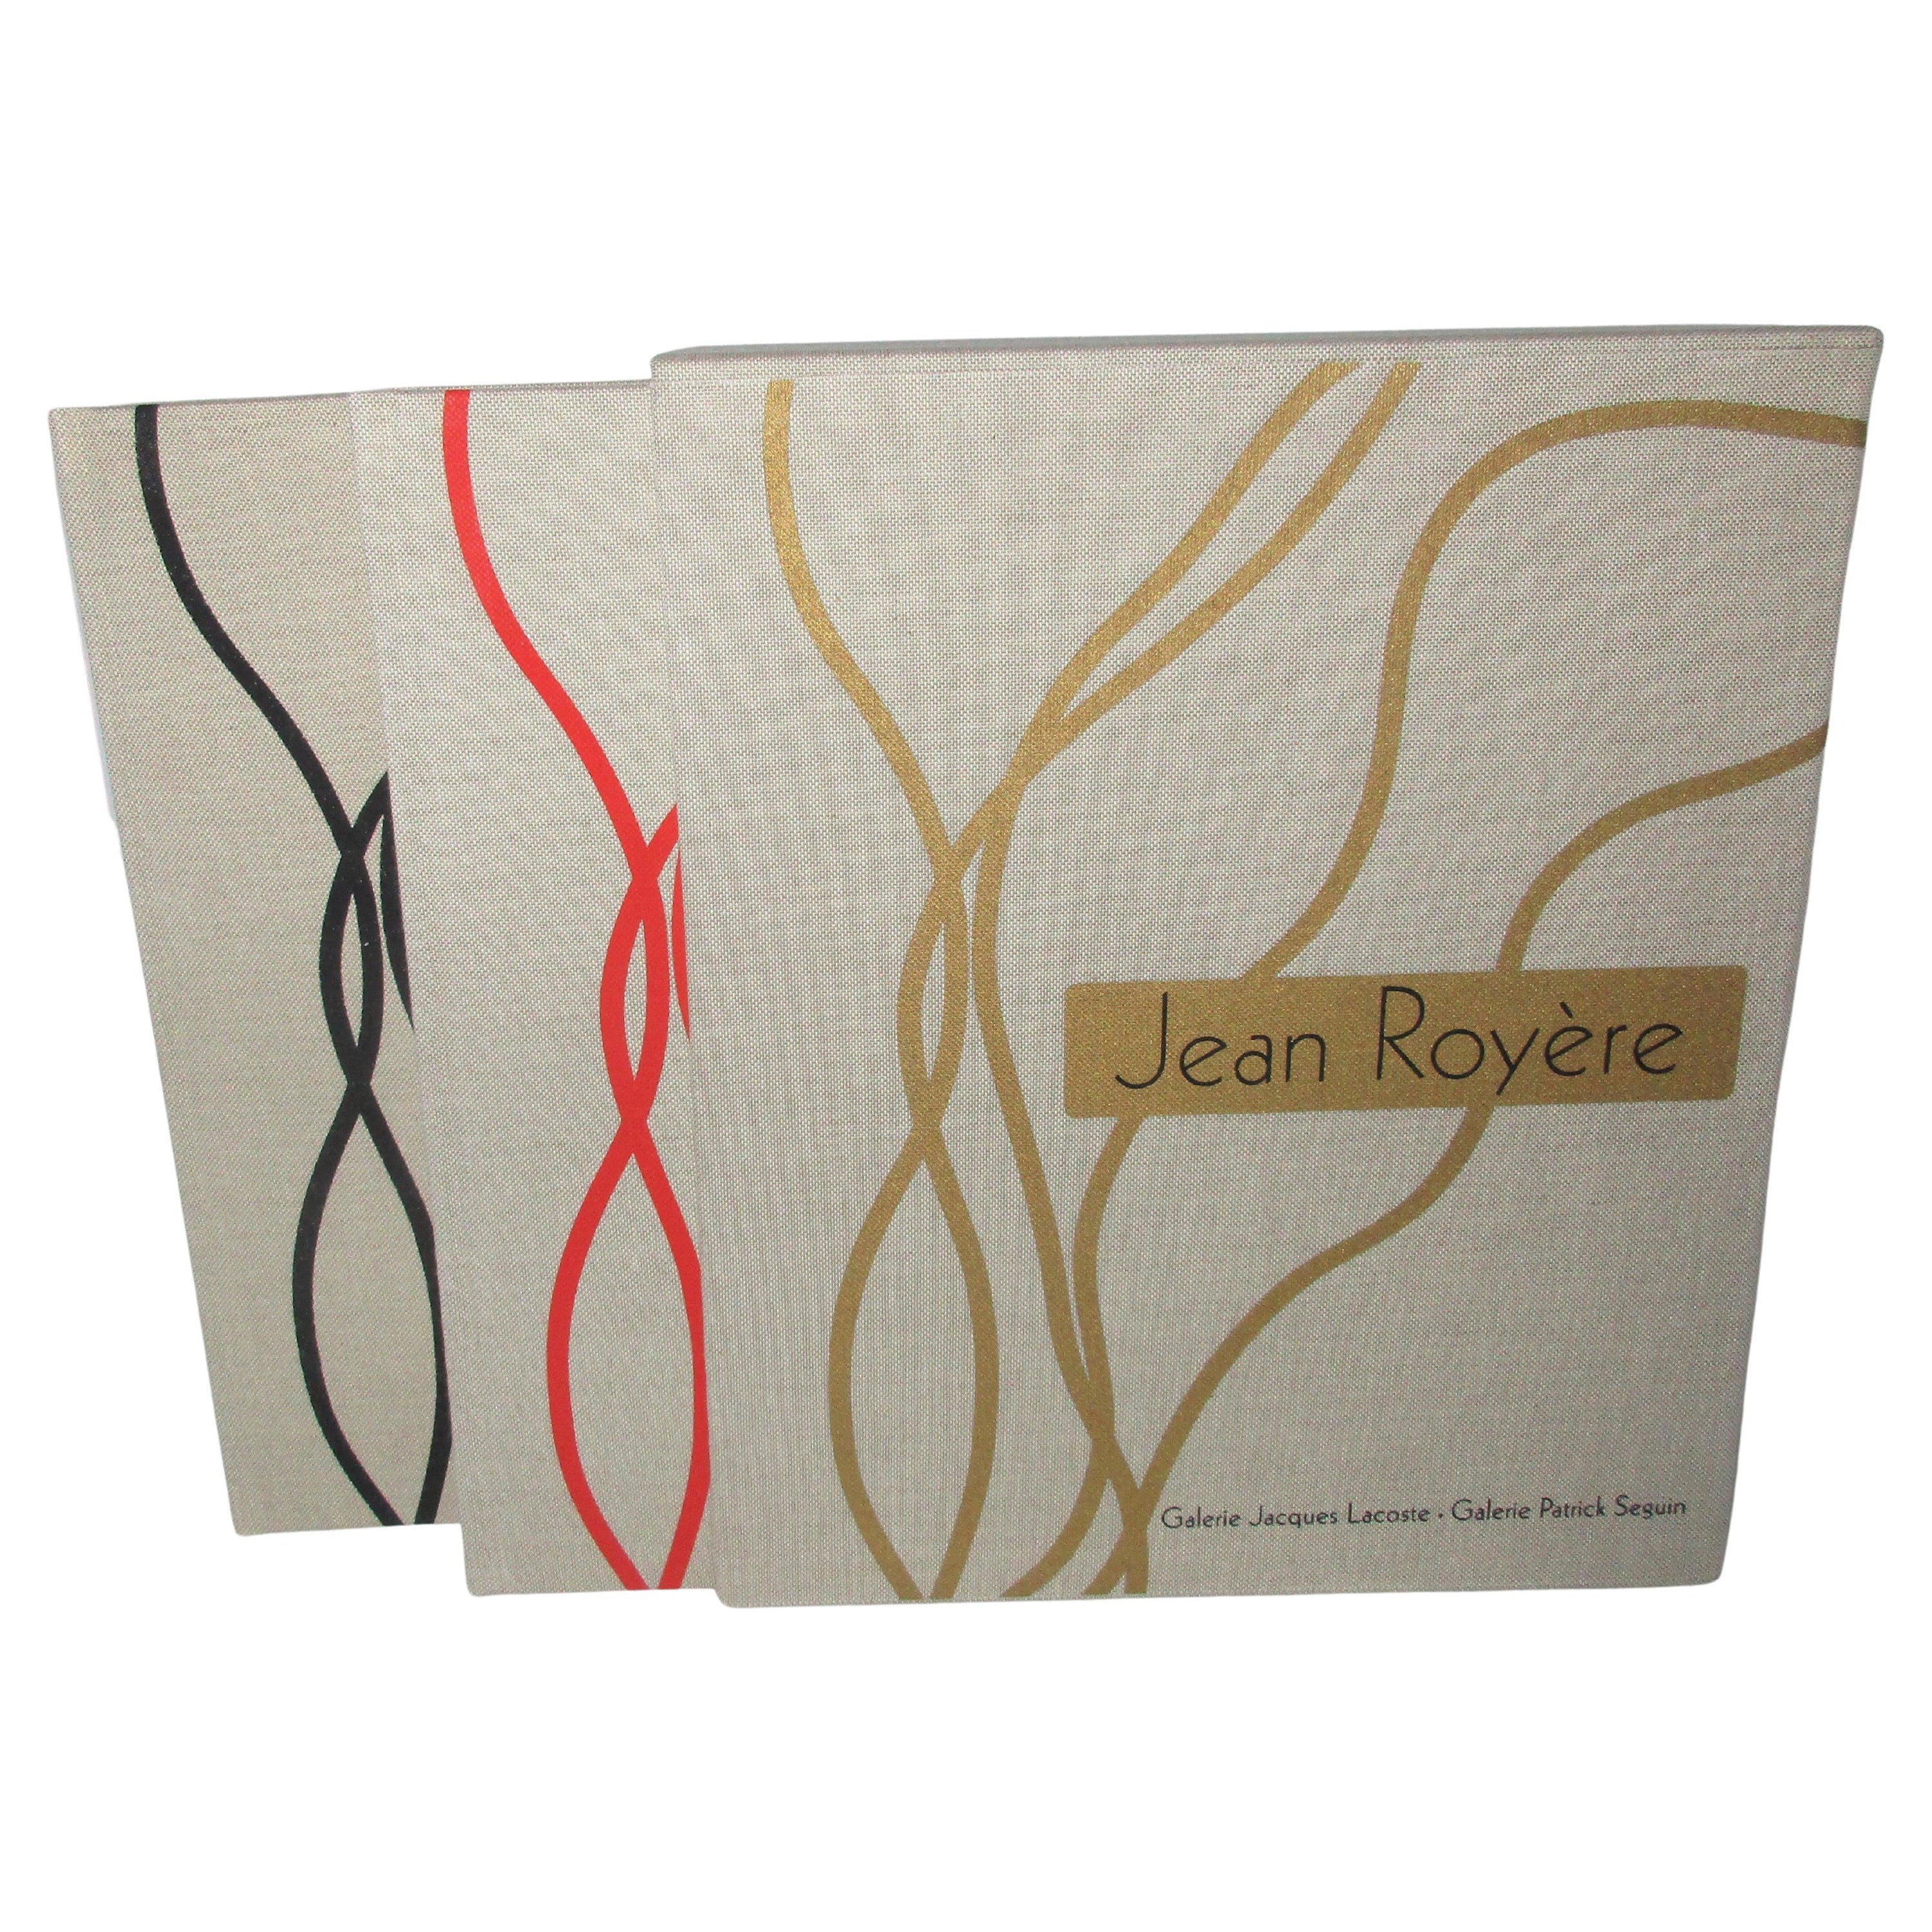 Jean Royere by Jacques Lacoste & Patrick Seguin (Book) For Sale